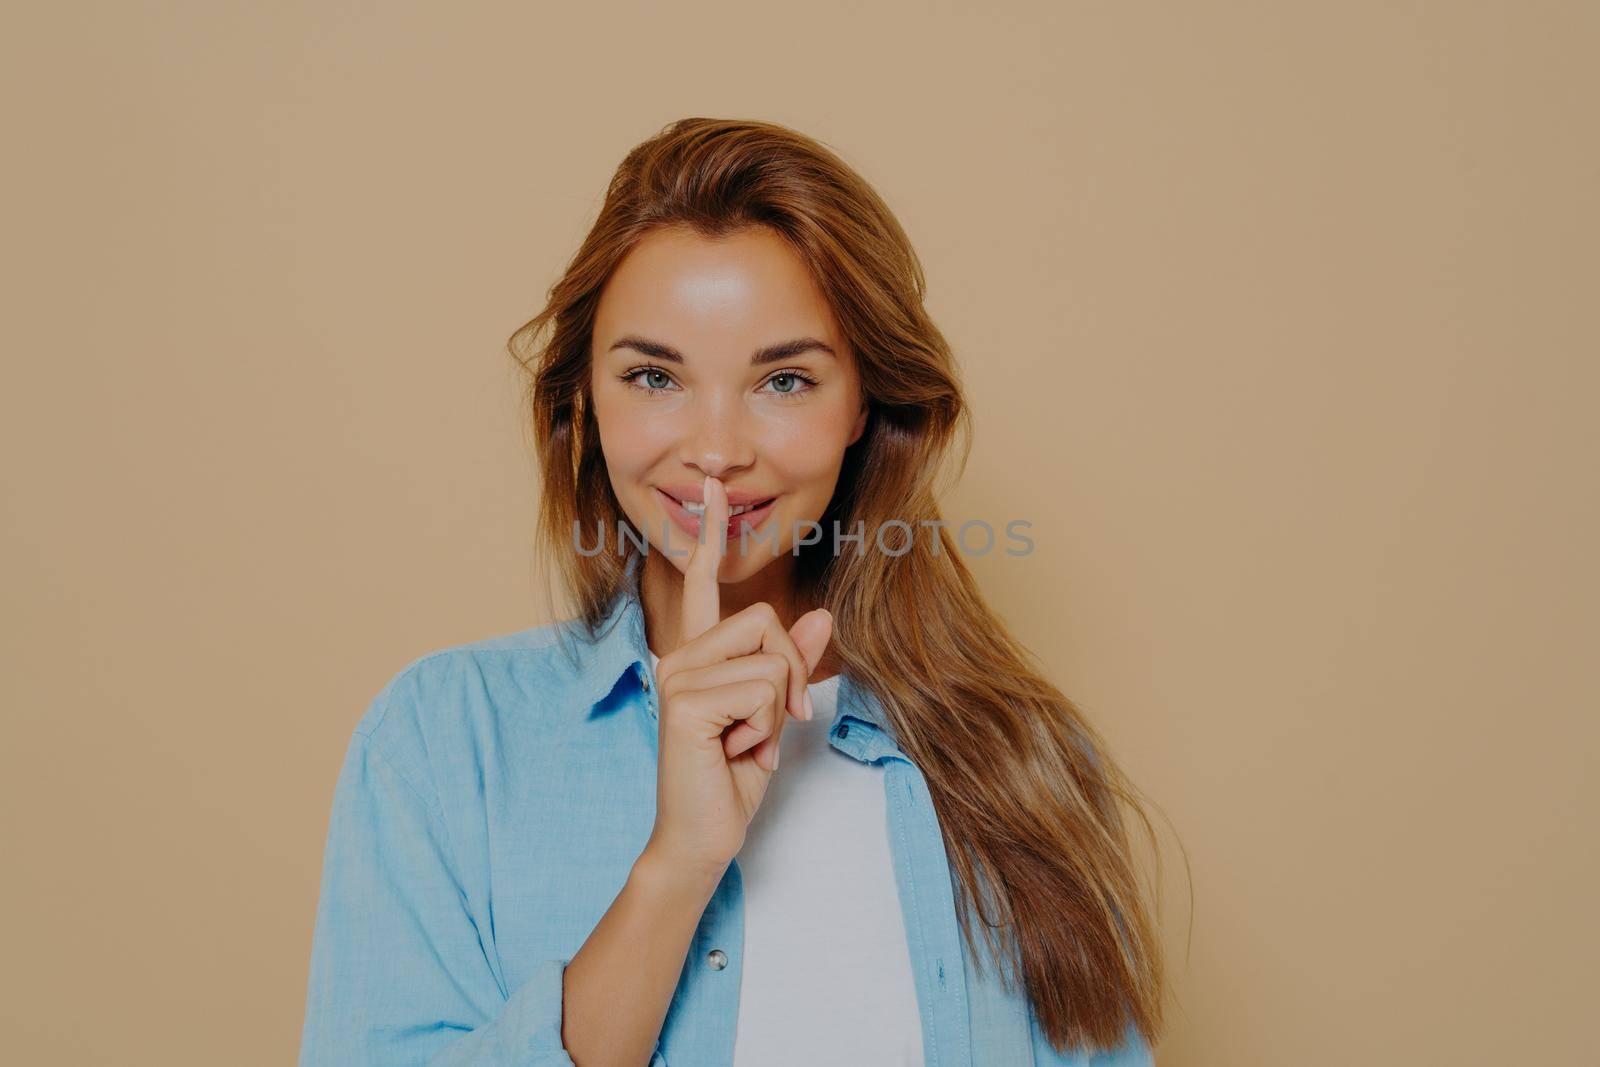 Portrait of joyful smiling female with long light brown hair holding index finger at her lips, saying 'shh', asking for silent or to keep her secret. Human face expressions, emotions and feelings